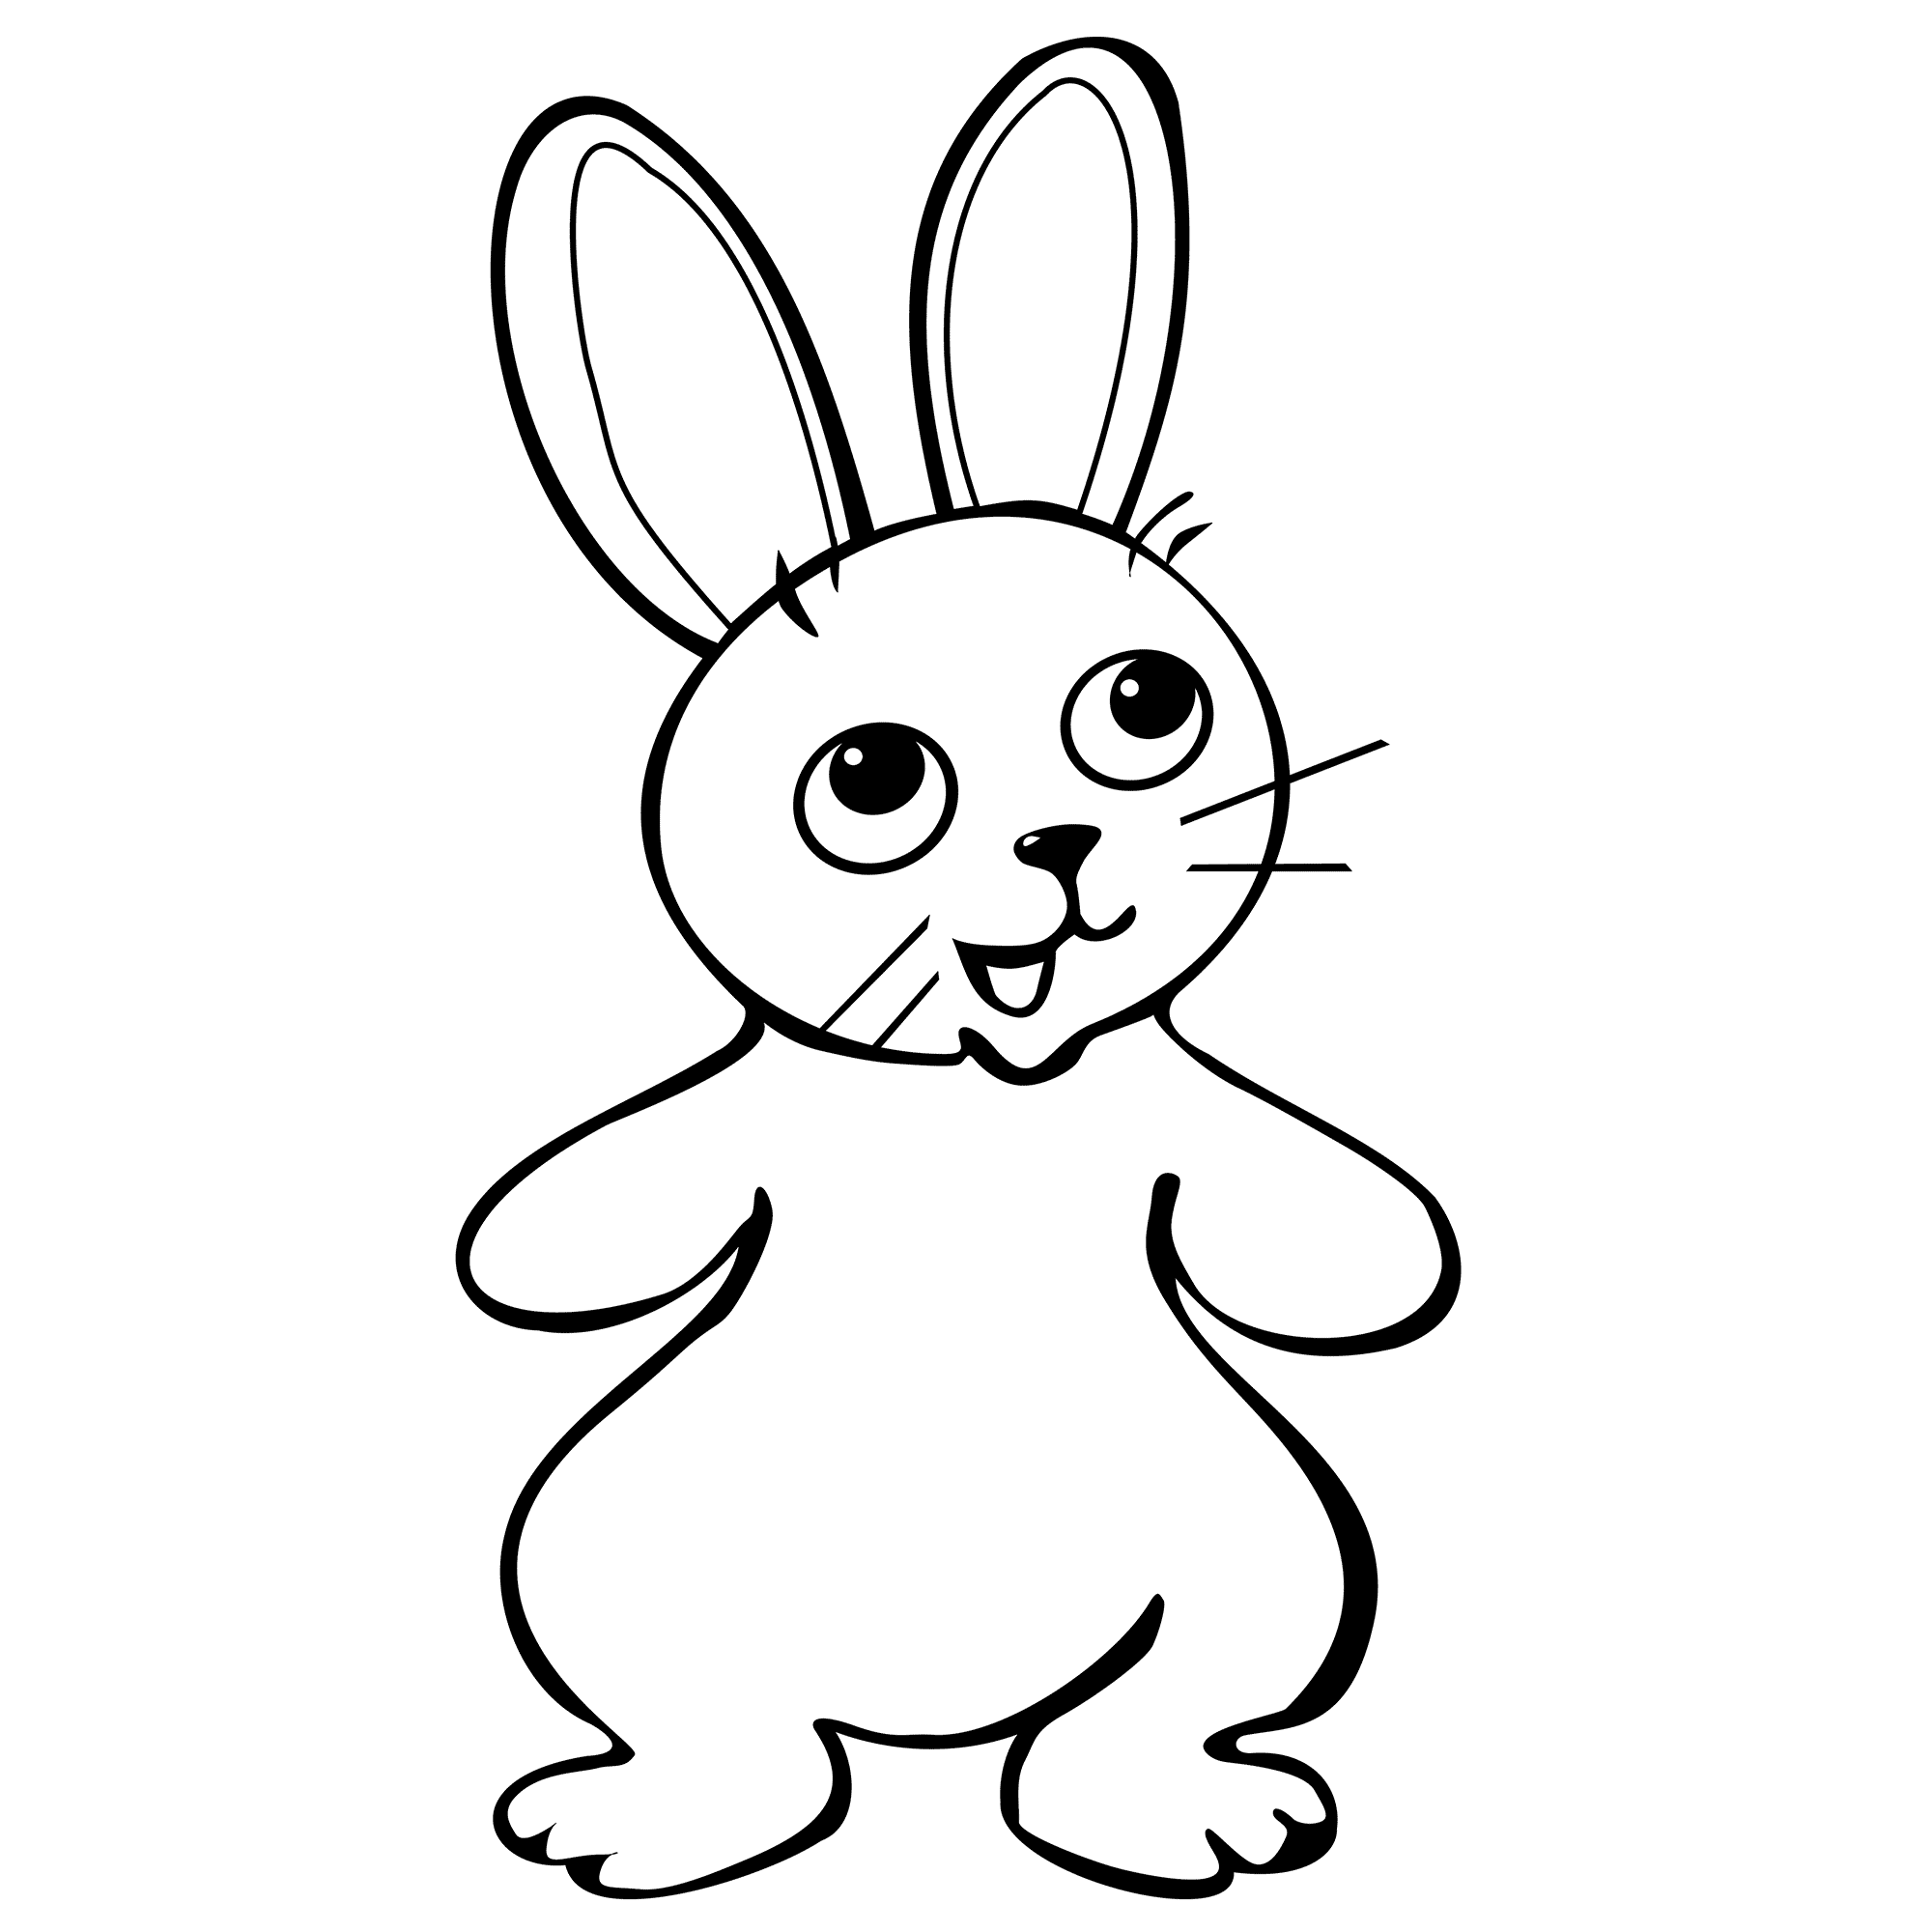 free printable easter rabbit pictures top 15 free printable easter bunny coloring pages online rabbit printable easter free pictures 